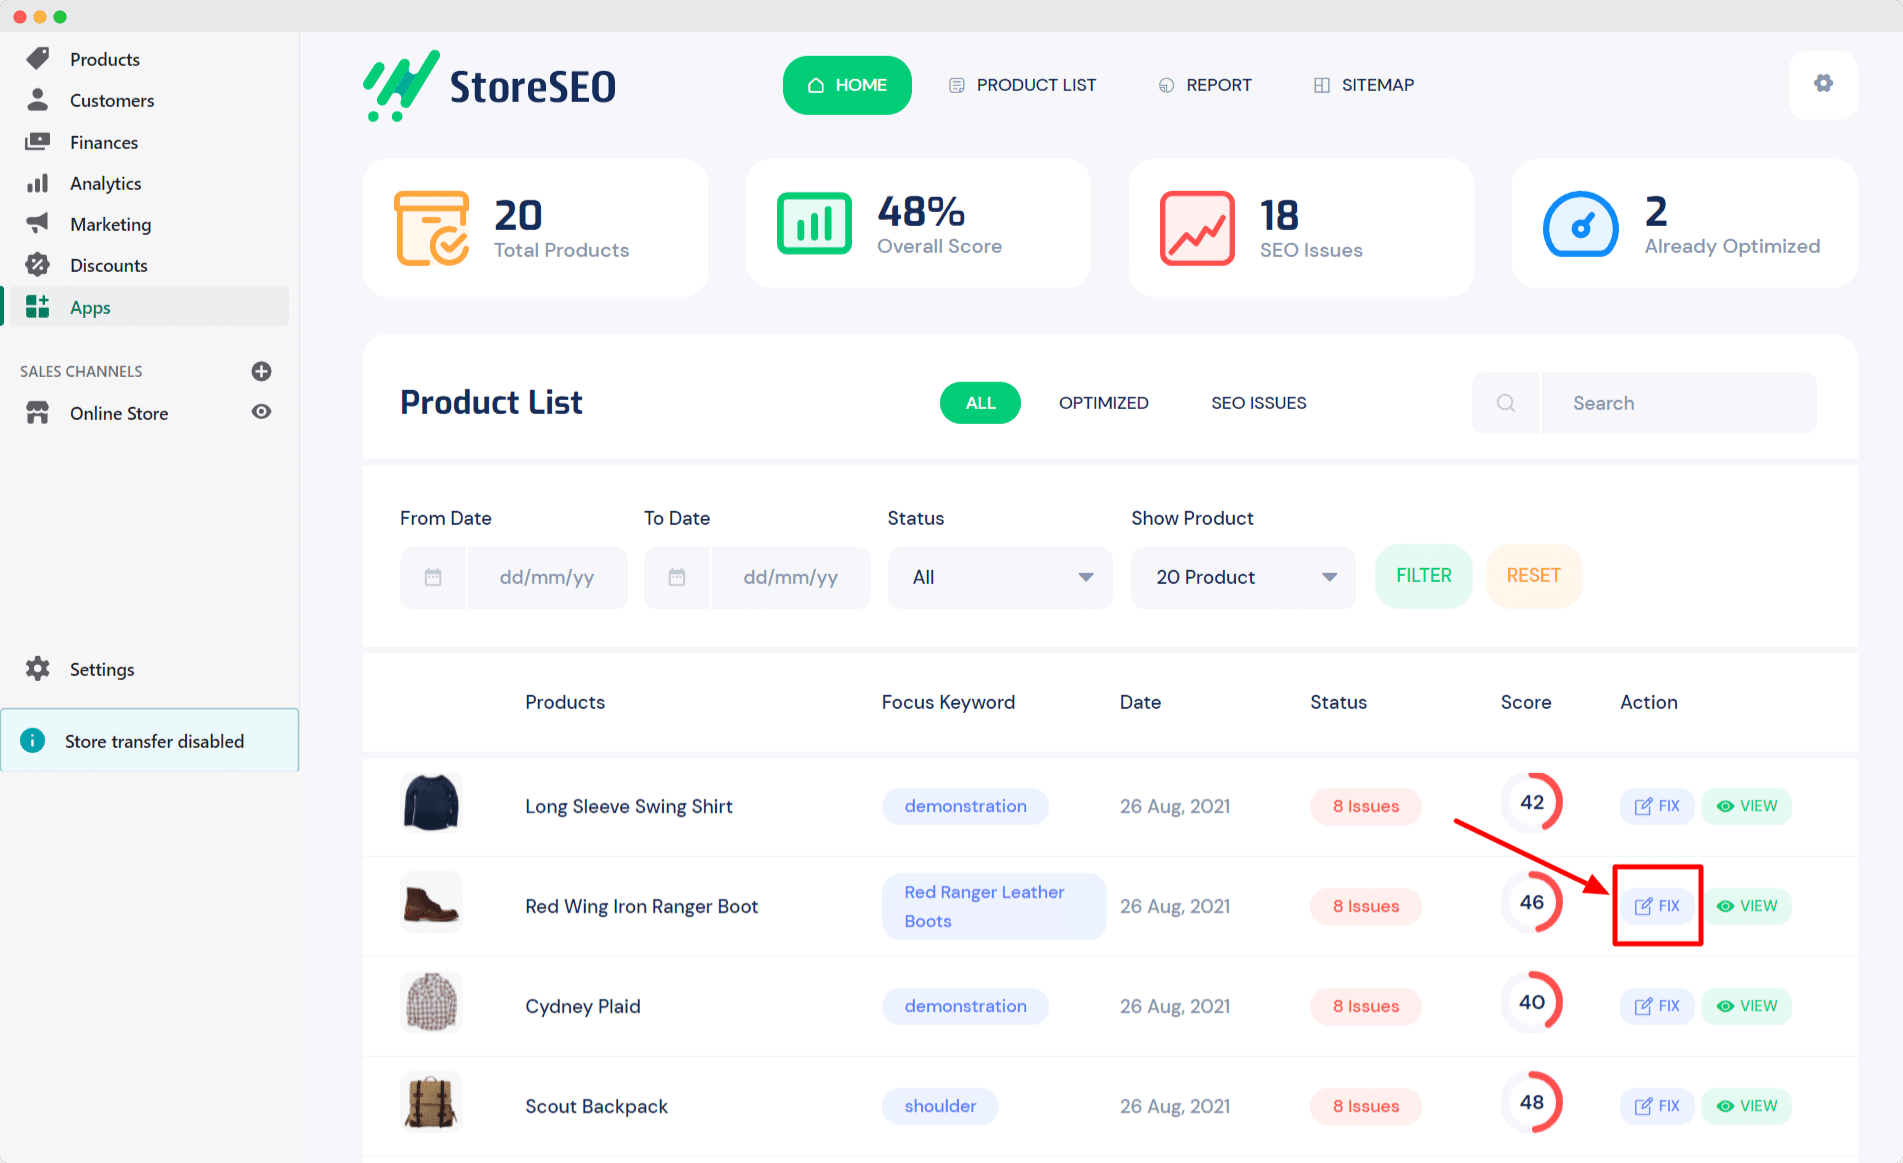 StoreSEO